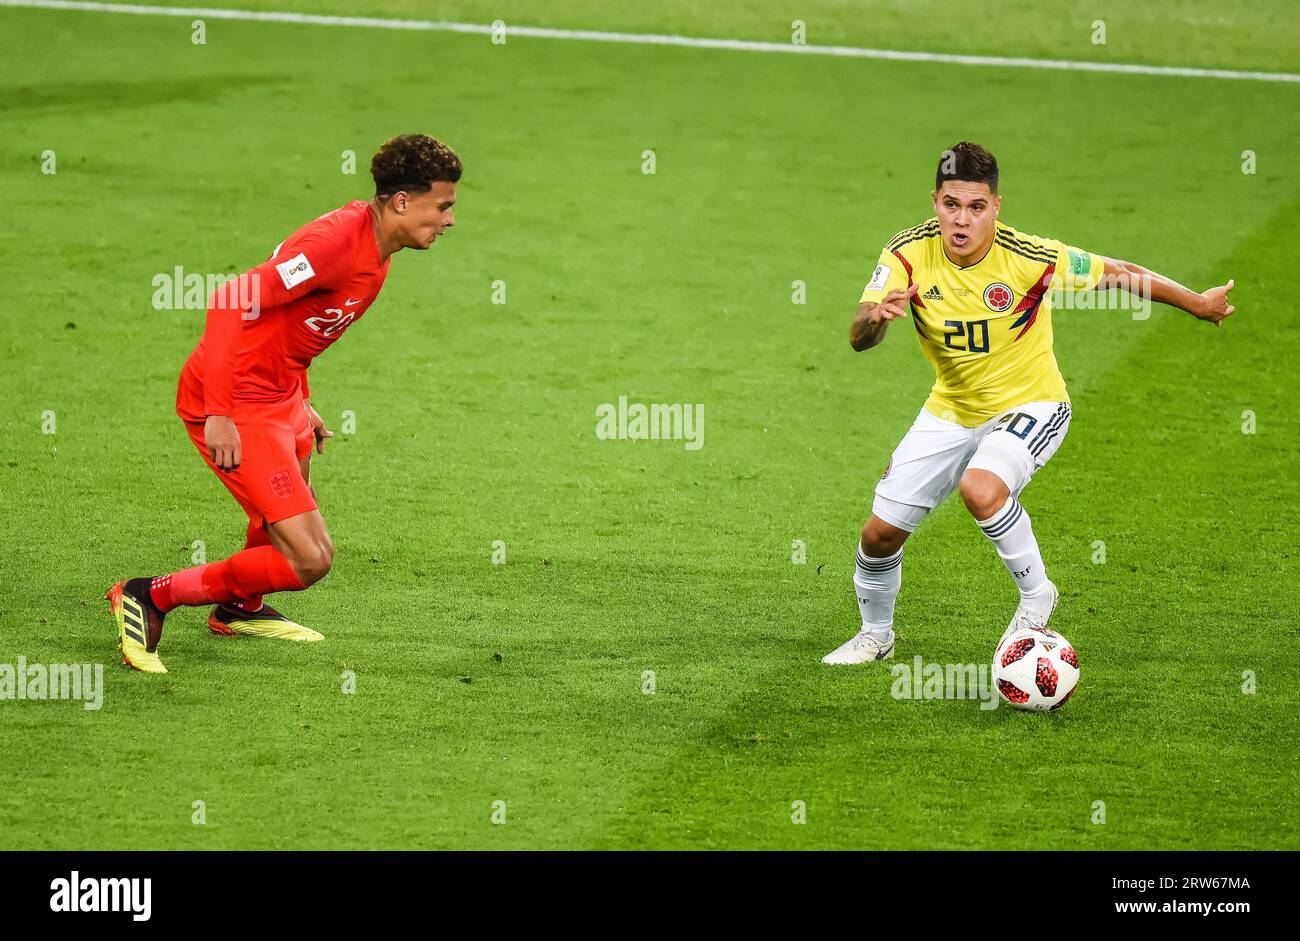 Moscow, Russia – July 3, 2018. Colombia midfielder Juan Quintero against England national football team midfielder Dele Alli during World Cup 2018 Rou Stock Photo